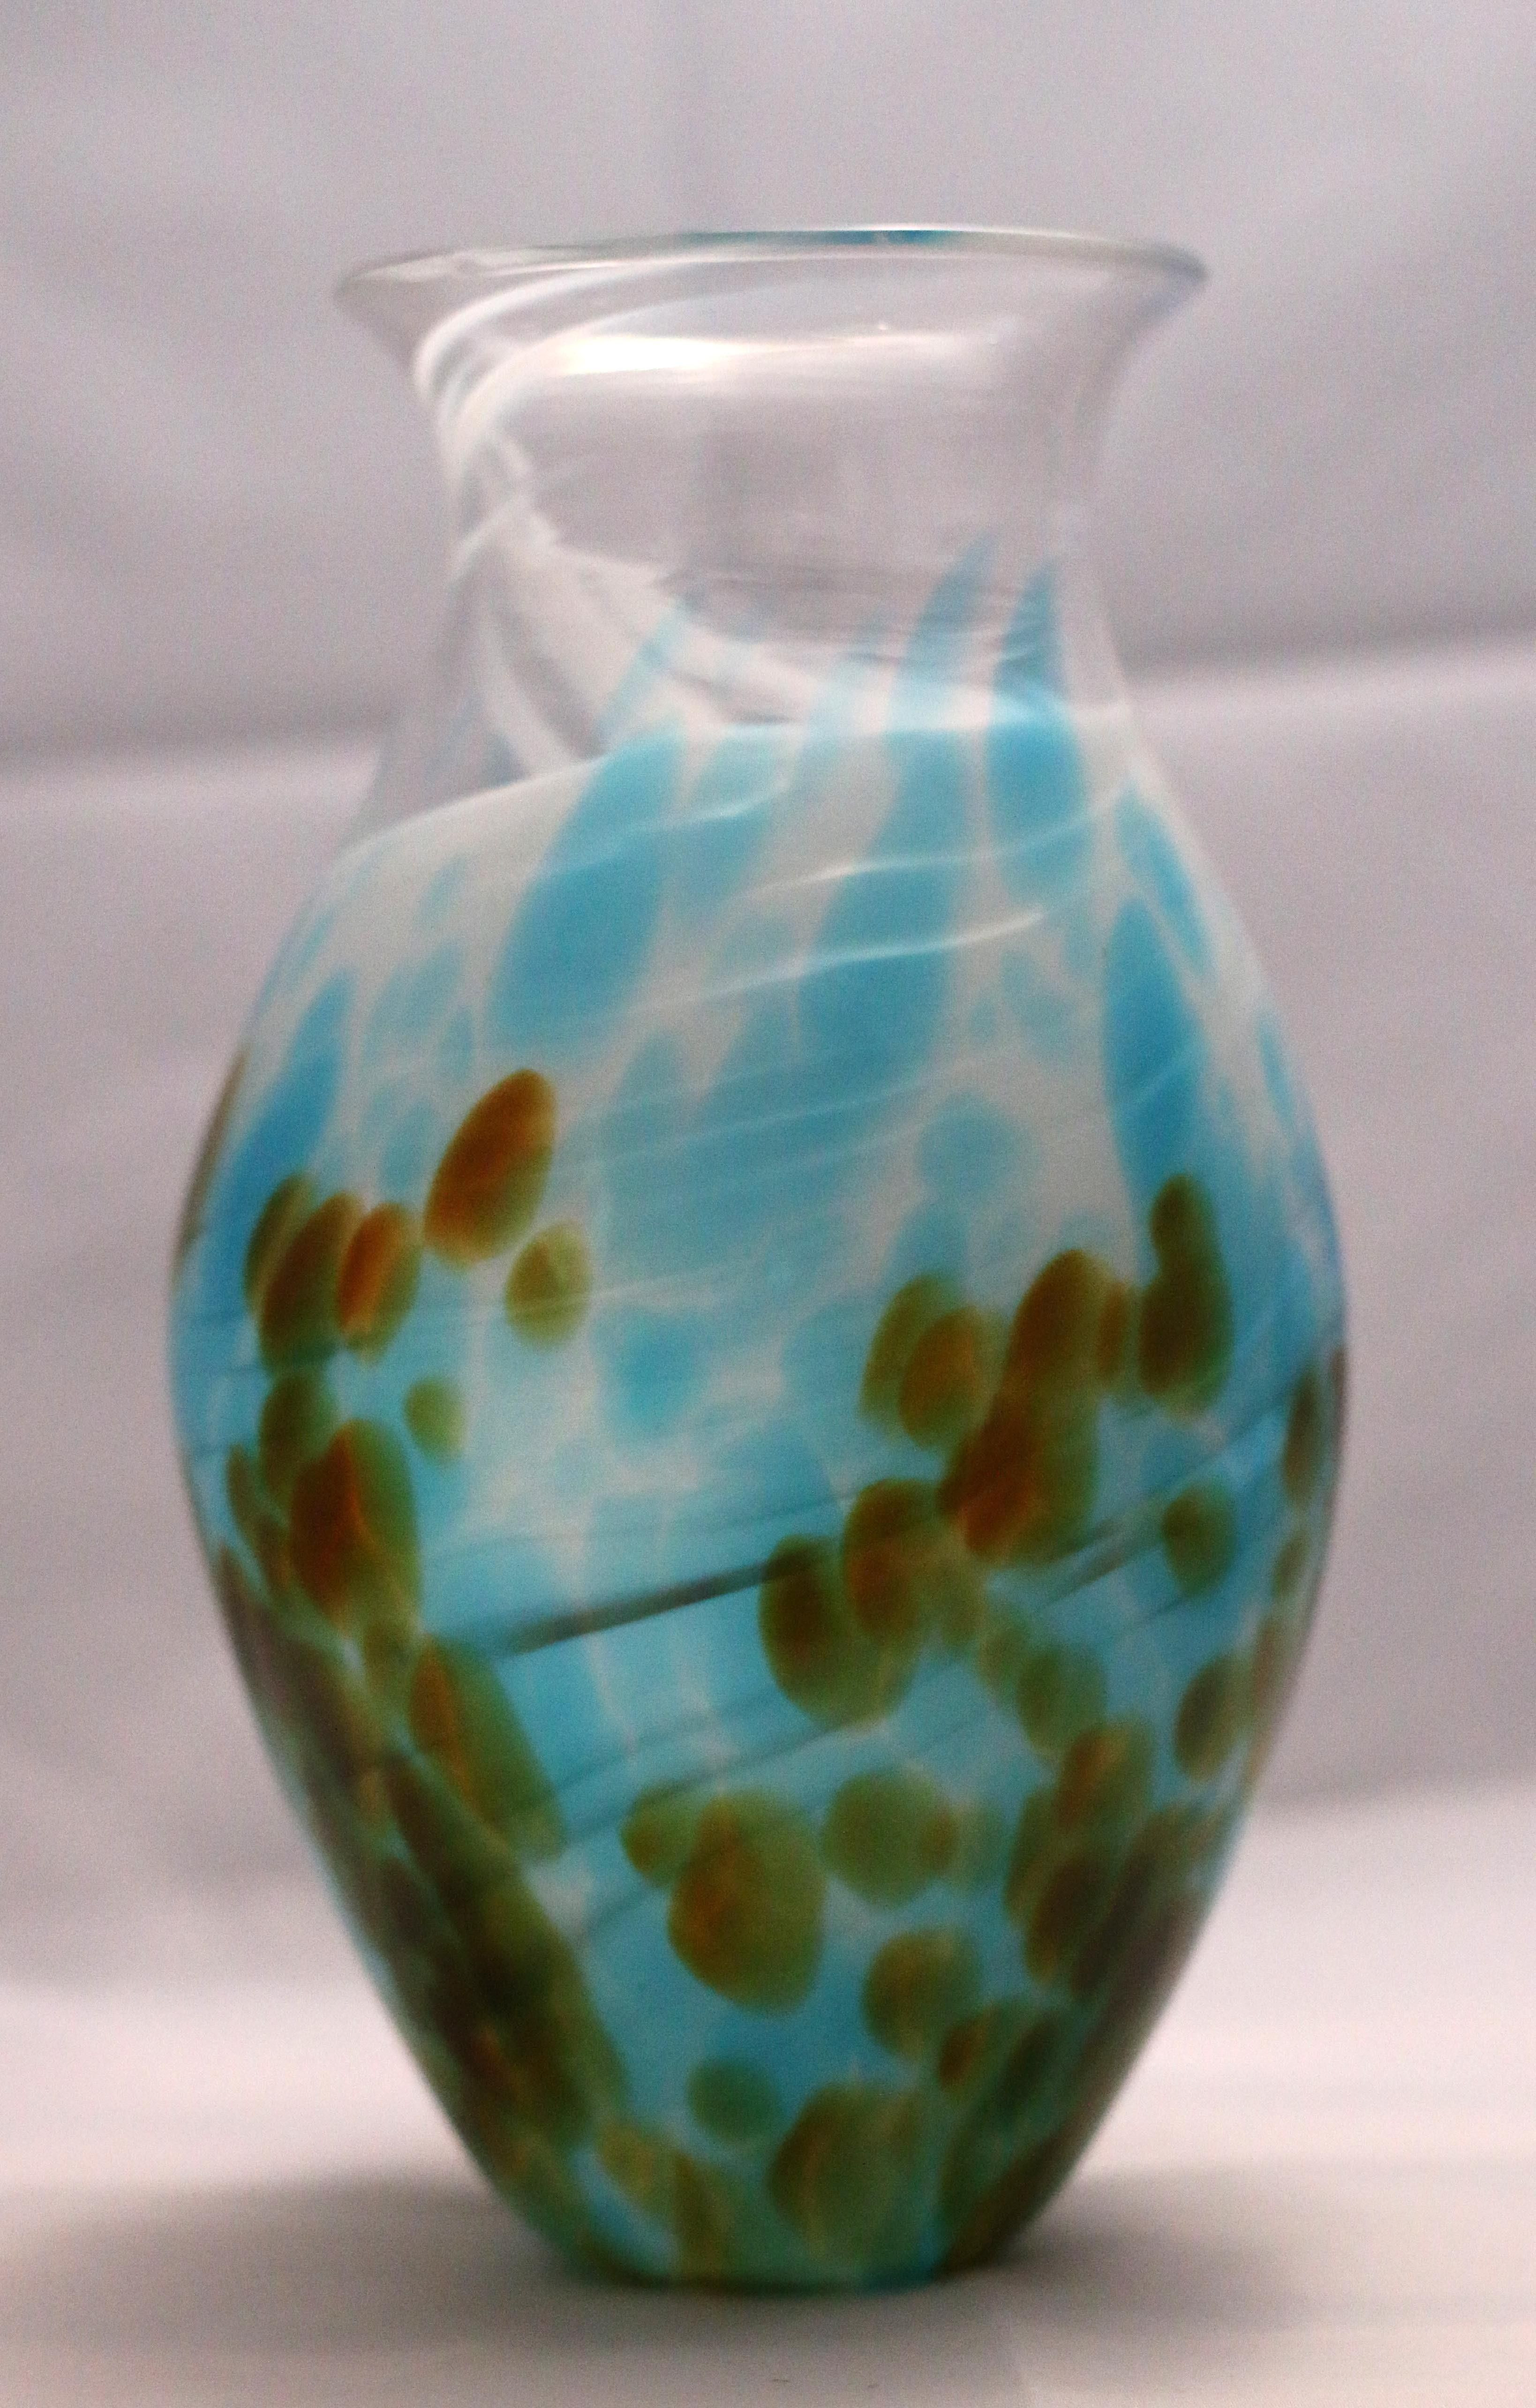 29 Lovable Different Types Of Glass Vases 2024 free download different types of glass vases of 40 glass vases bulk the weekly world intended for decorative glass bowl inspirational living room milk glass vase